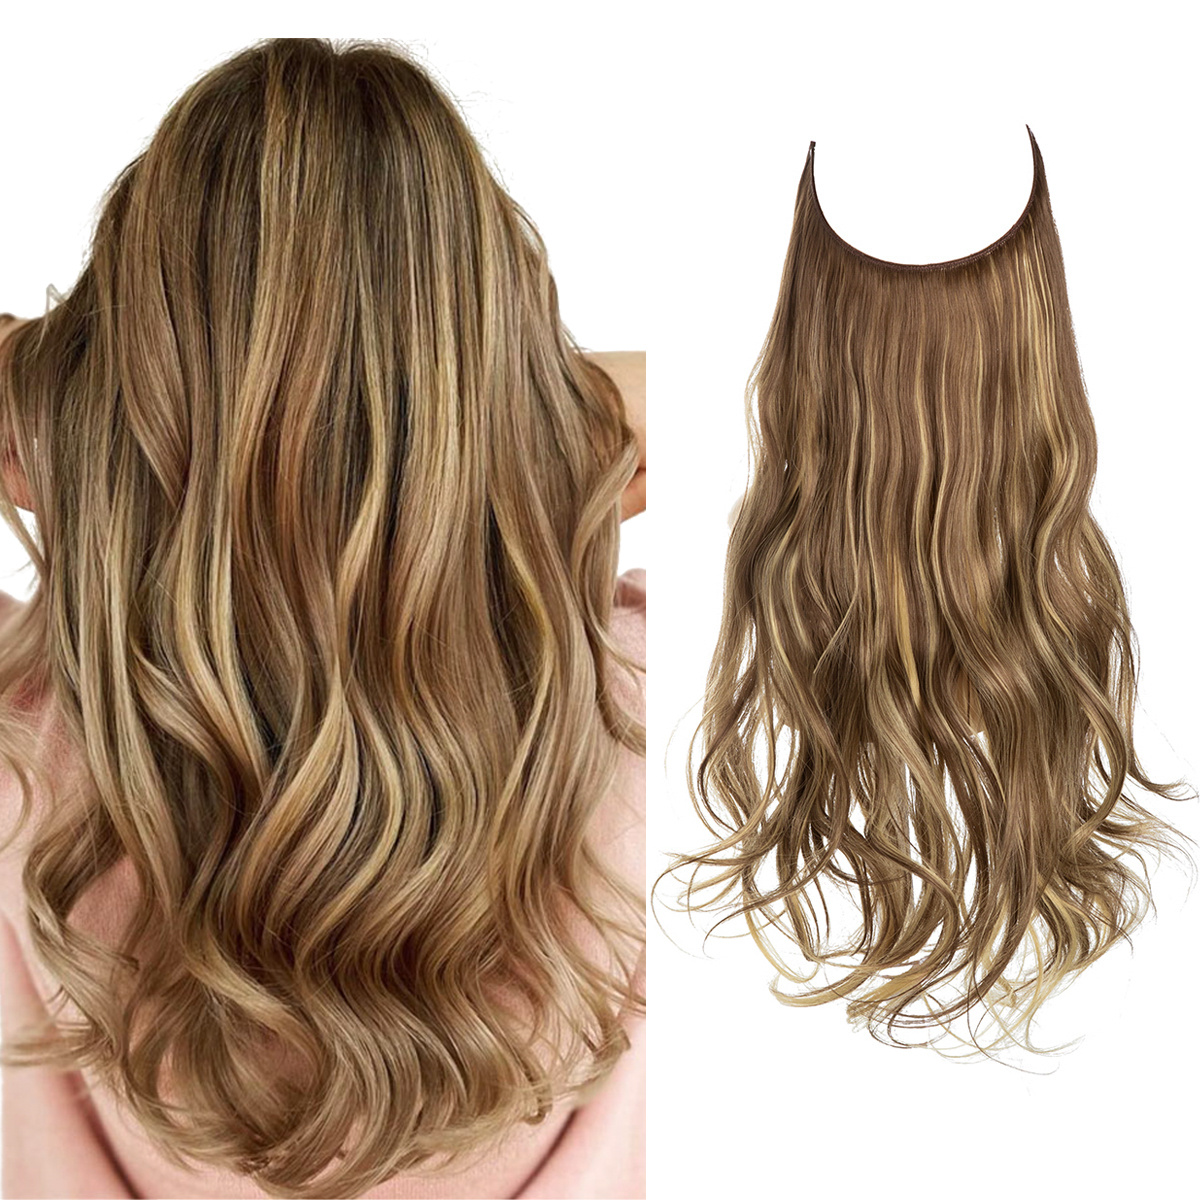 Wavy Curly Hair Extensions